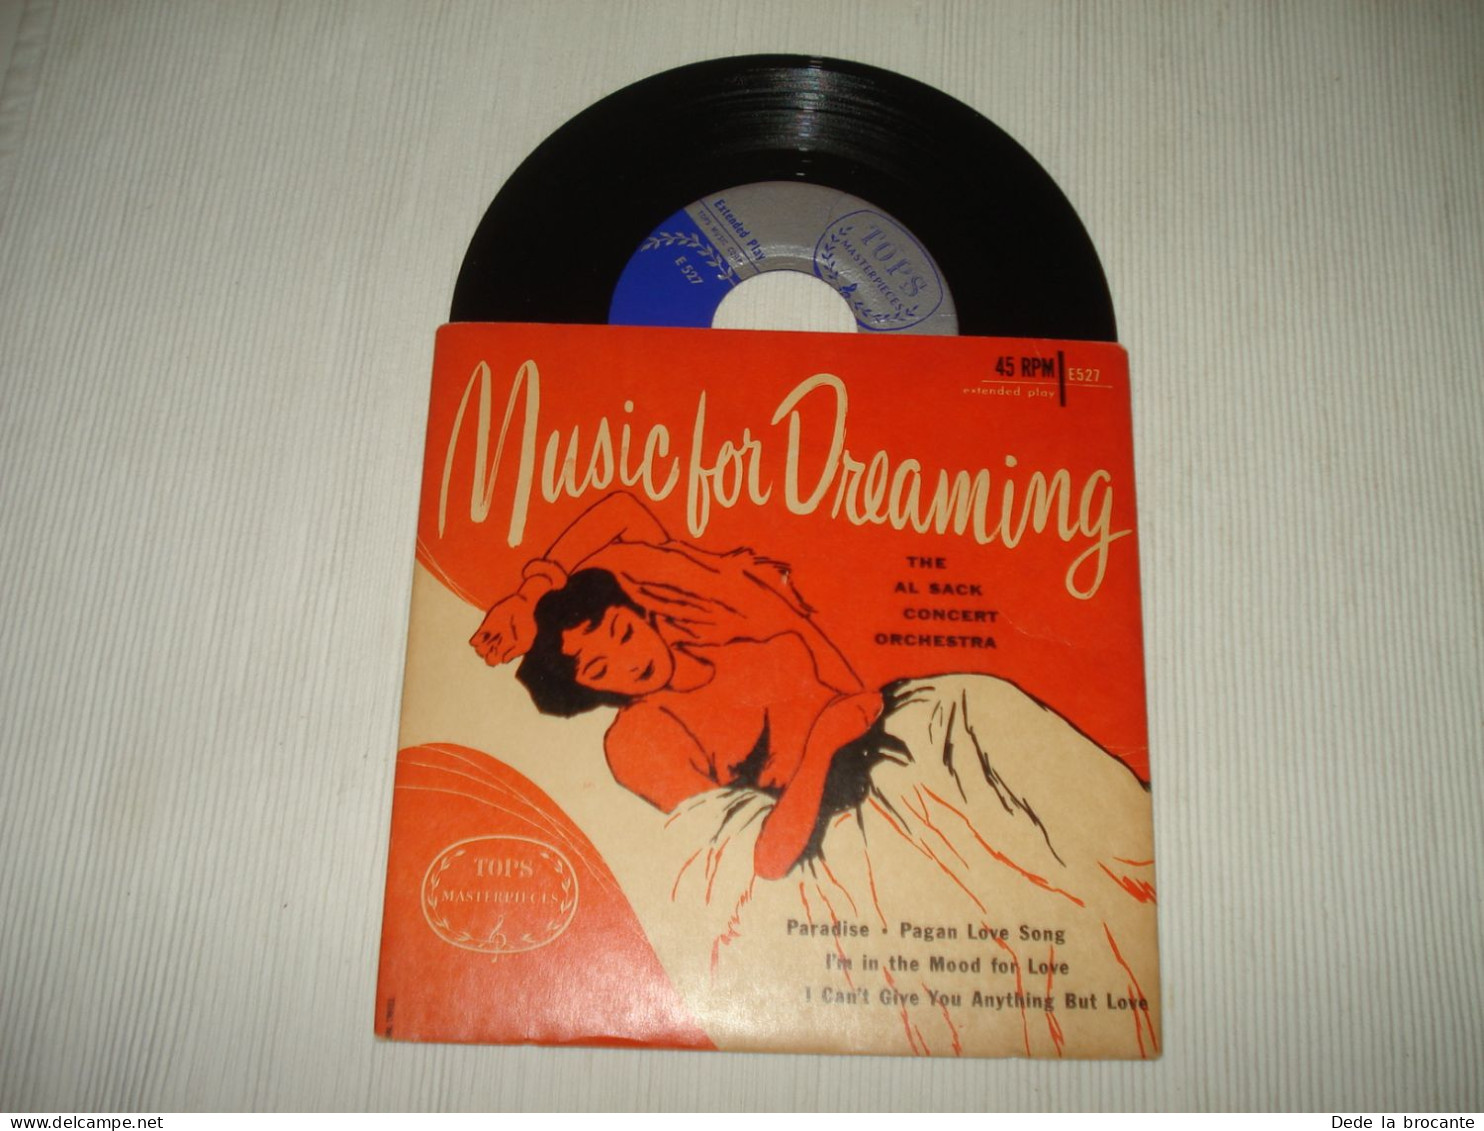 B13 / Al Sack His Concert Orch.  Music For Dreaming - EP – E 527 - US 1957 NM/NM - Spezialformate